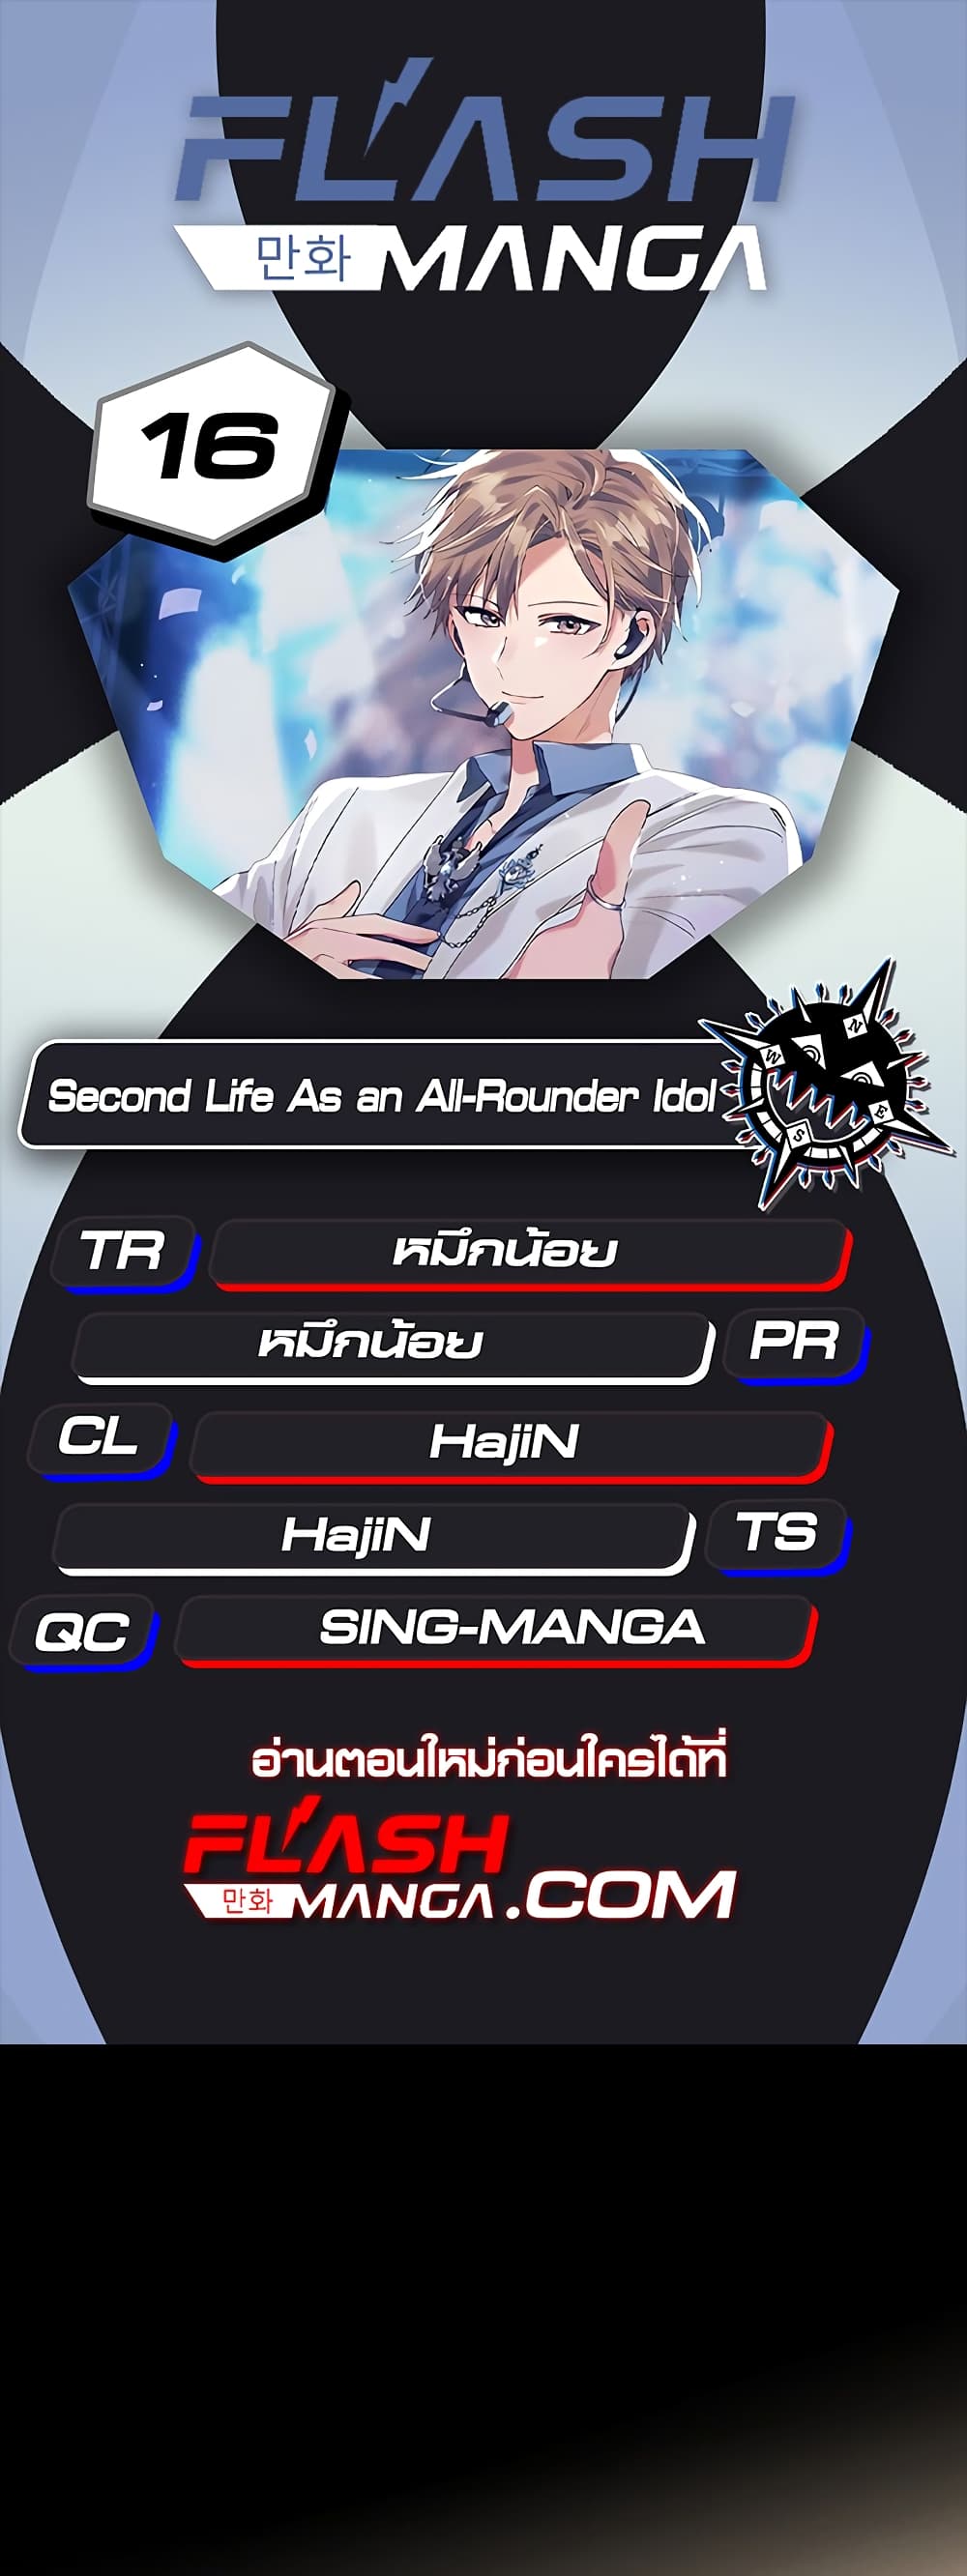 The Second Life of an All-Rounder Idol 16-16